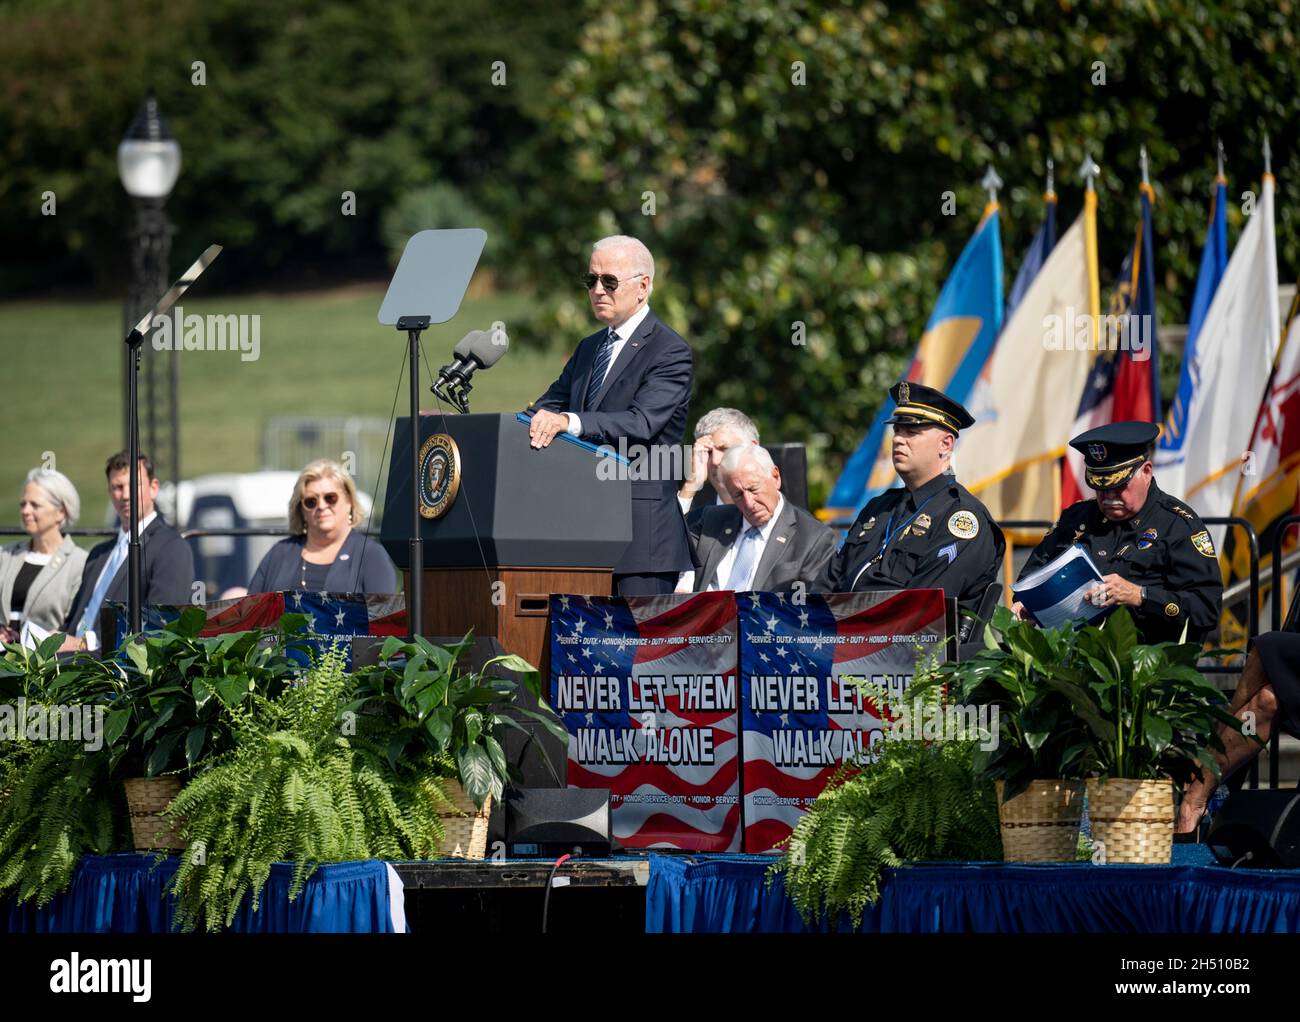 Washington, United States of America. 16 October, 2021. U.S President Joe Biden addresses a ceremony honoring fallen law enforcement officers at the 40th annual National Peace Officers Memorial Service at the U.S. Capitol October 16, 2021 in Washington, D.C. Credit: Benjamin Applebaum/Homeland Security/Alamy Live News Stock Photo